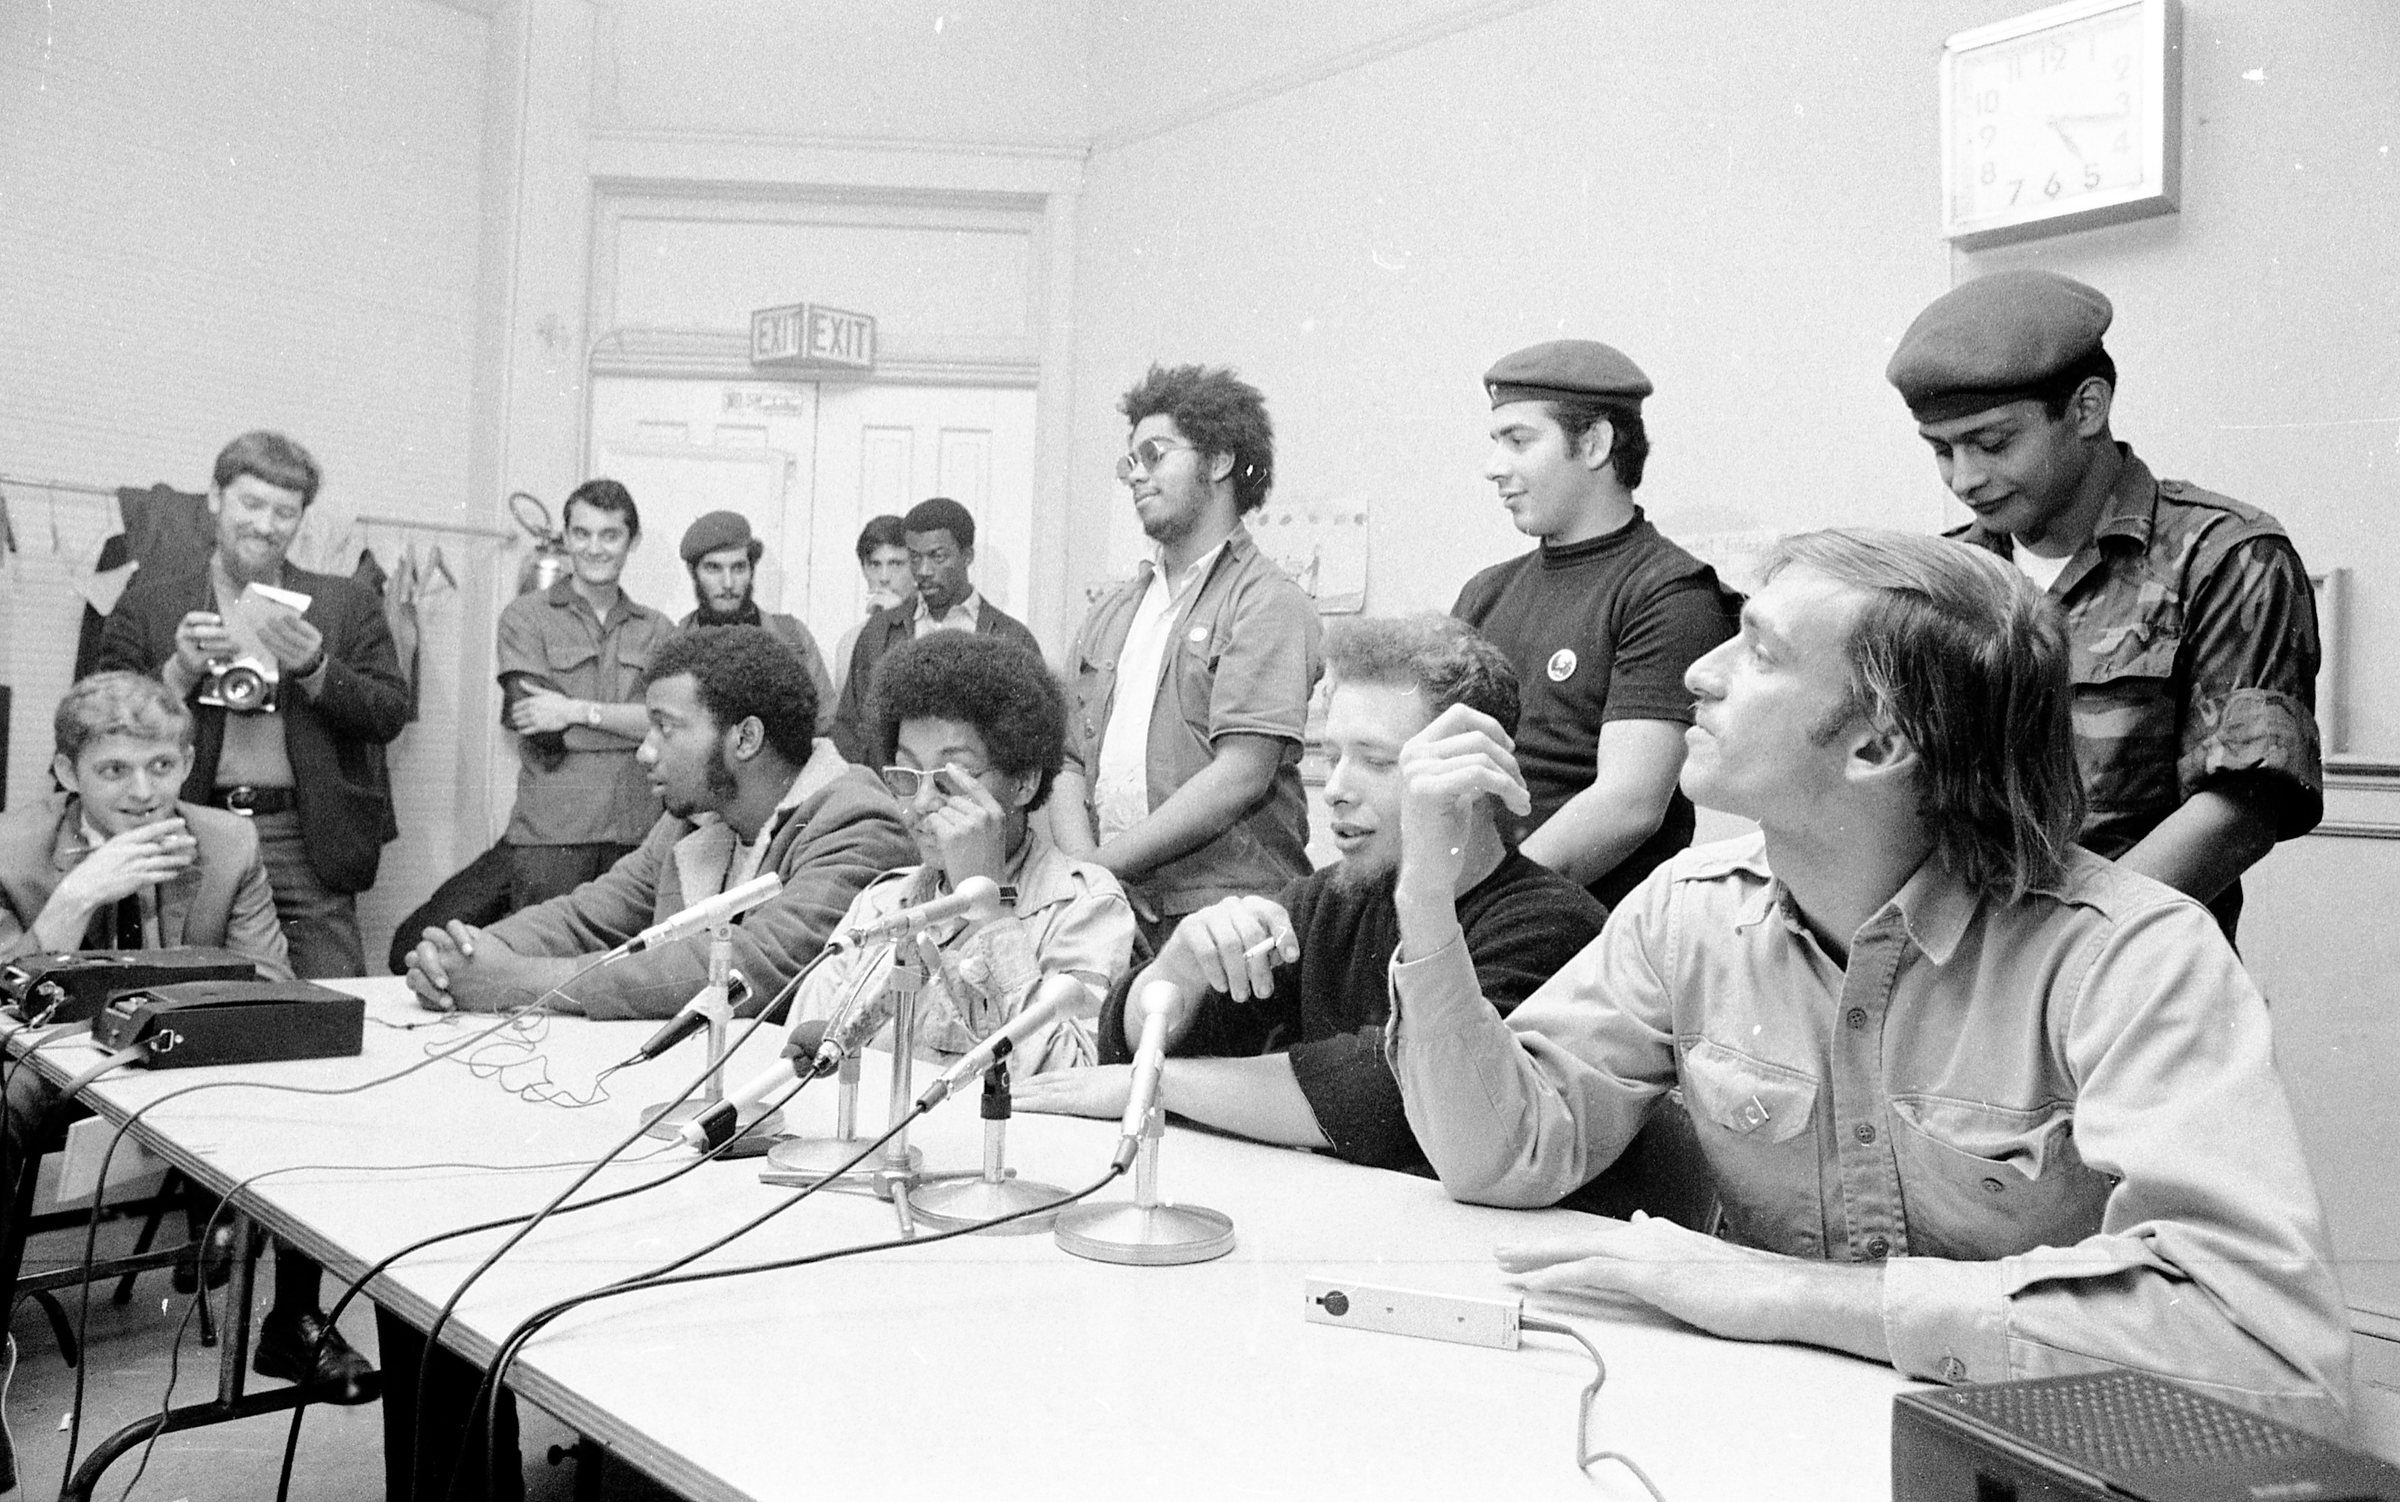 Press conference with representatives of the Black Panther Party, Revolutionary Youth Movement II, and the Young Lords